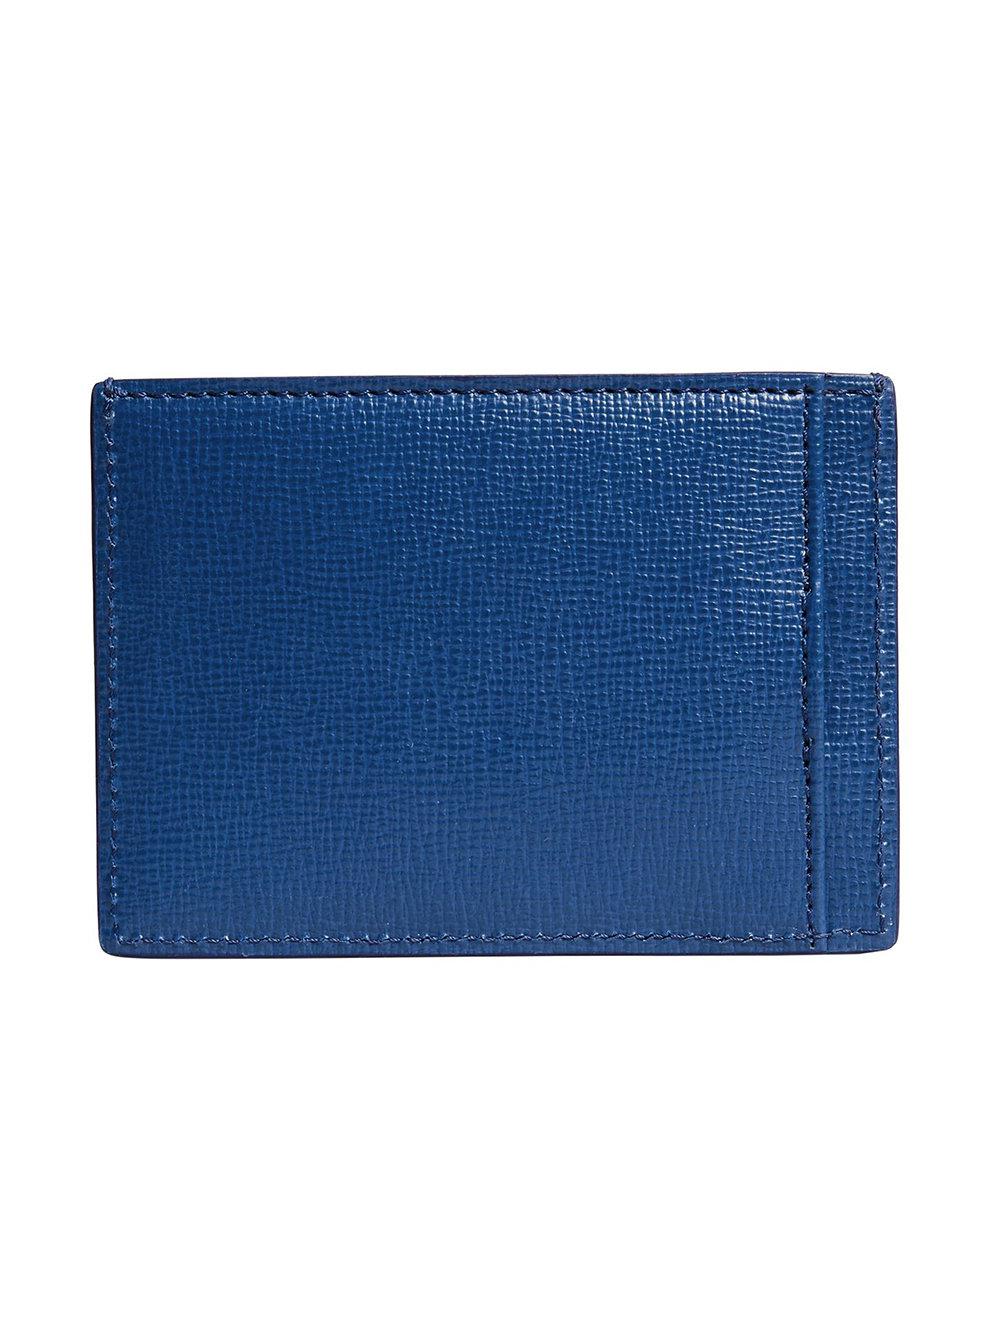 Burberry Money Card Holder Wallet Blue Leather for Sale in Halndle